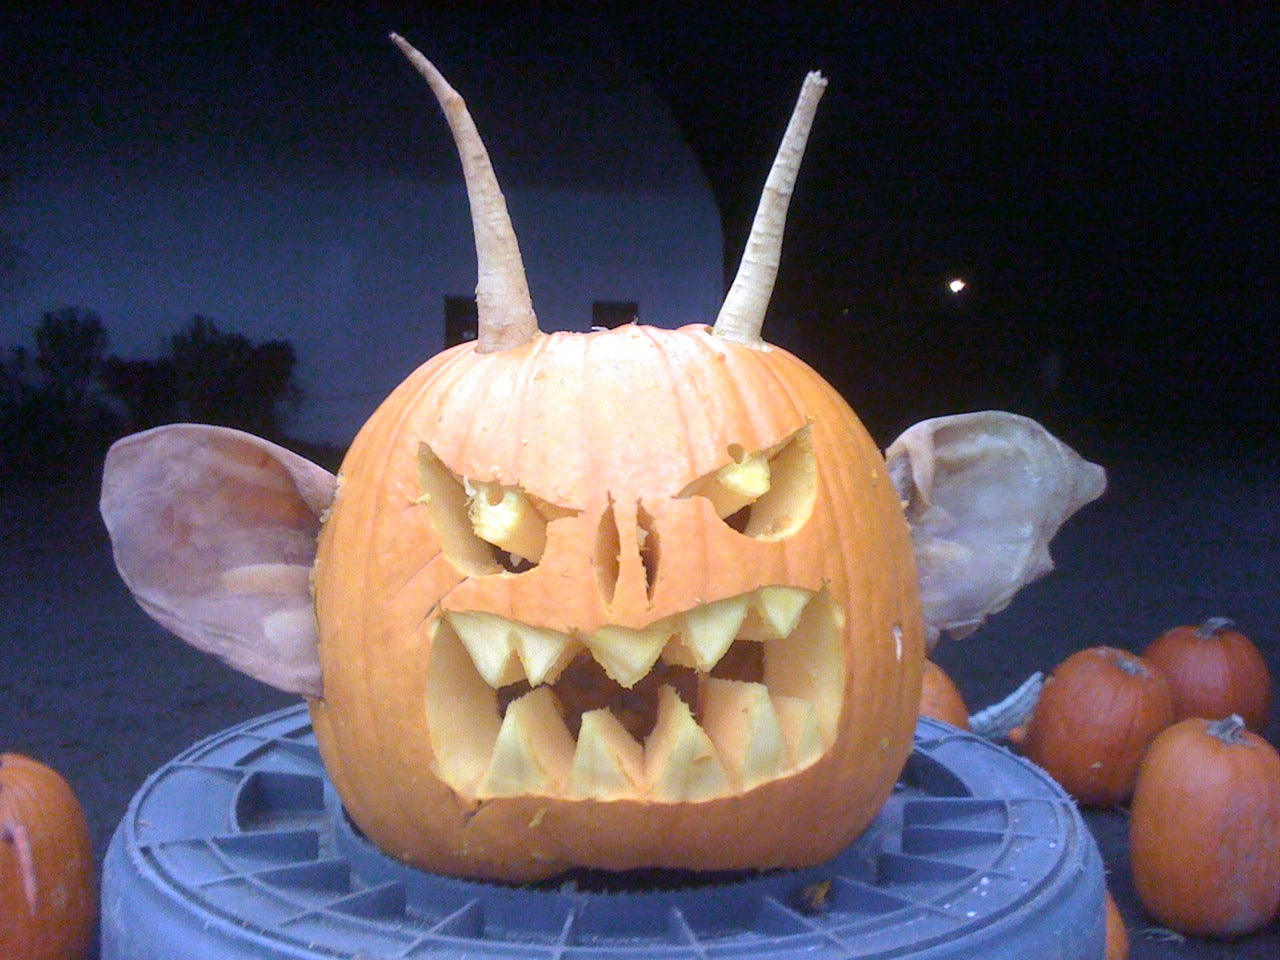 A Pumpkin Carving With Pig's Ears and Parsnips